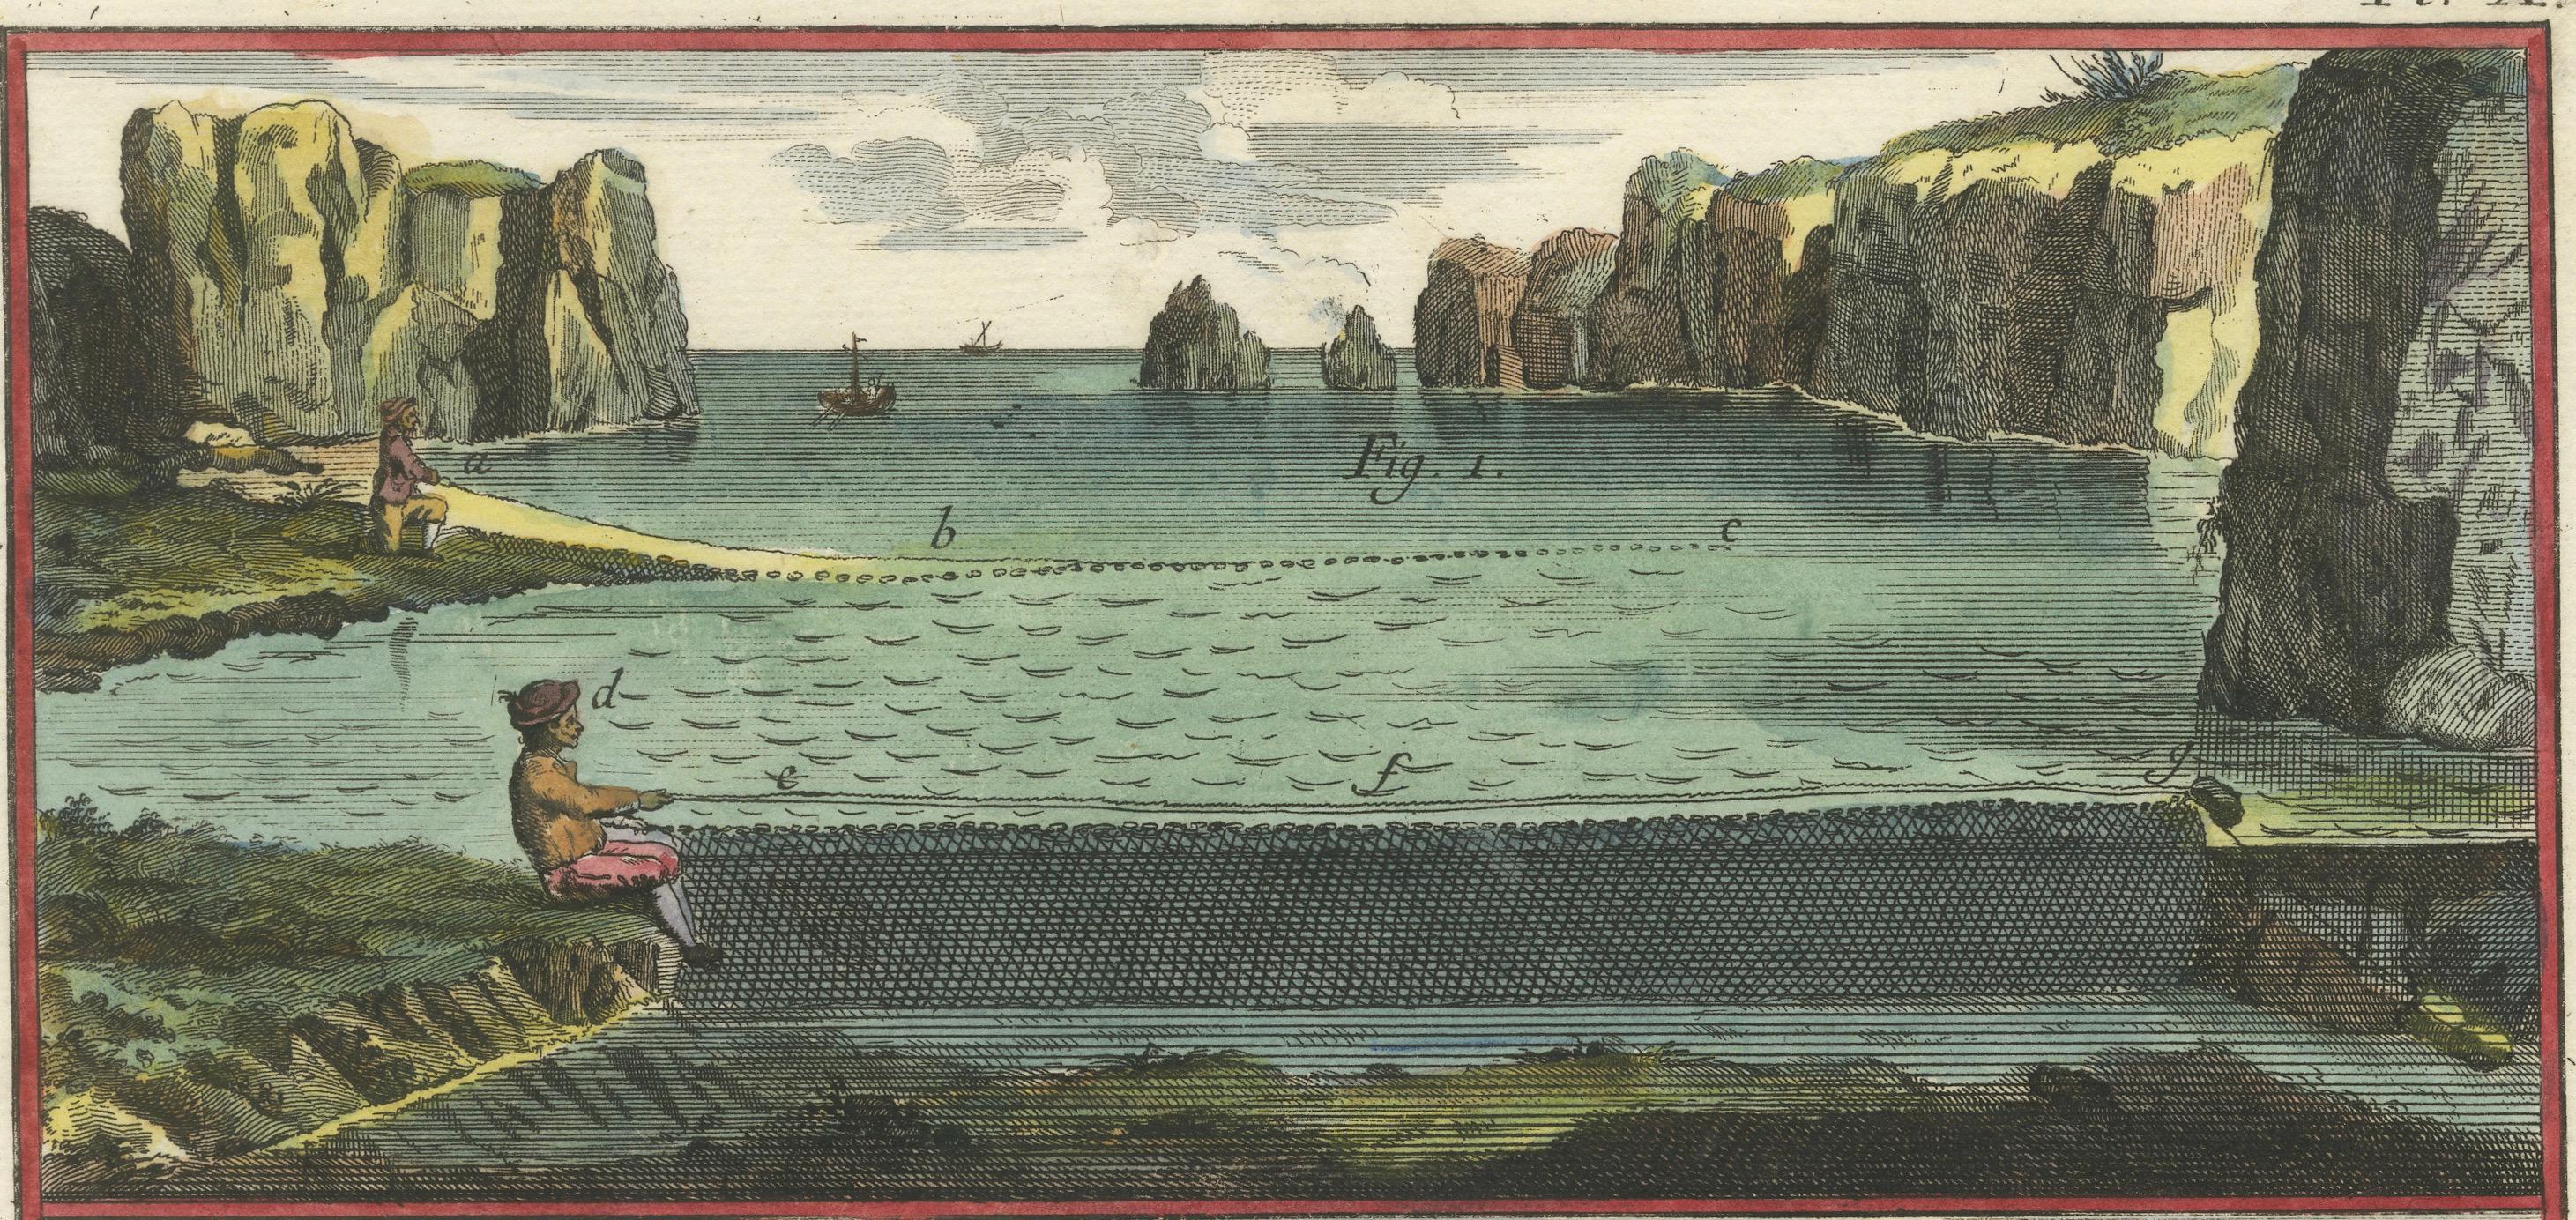 Late 18th Century The Art of Mackerel and Salmon Fishing - An Exquisite 1793 Panckoucke Engraving For Sale